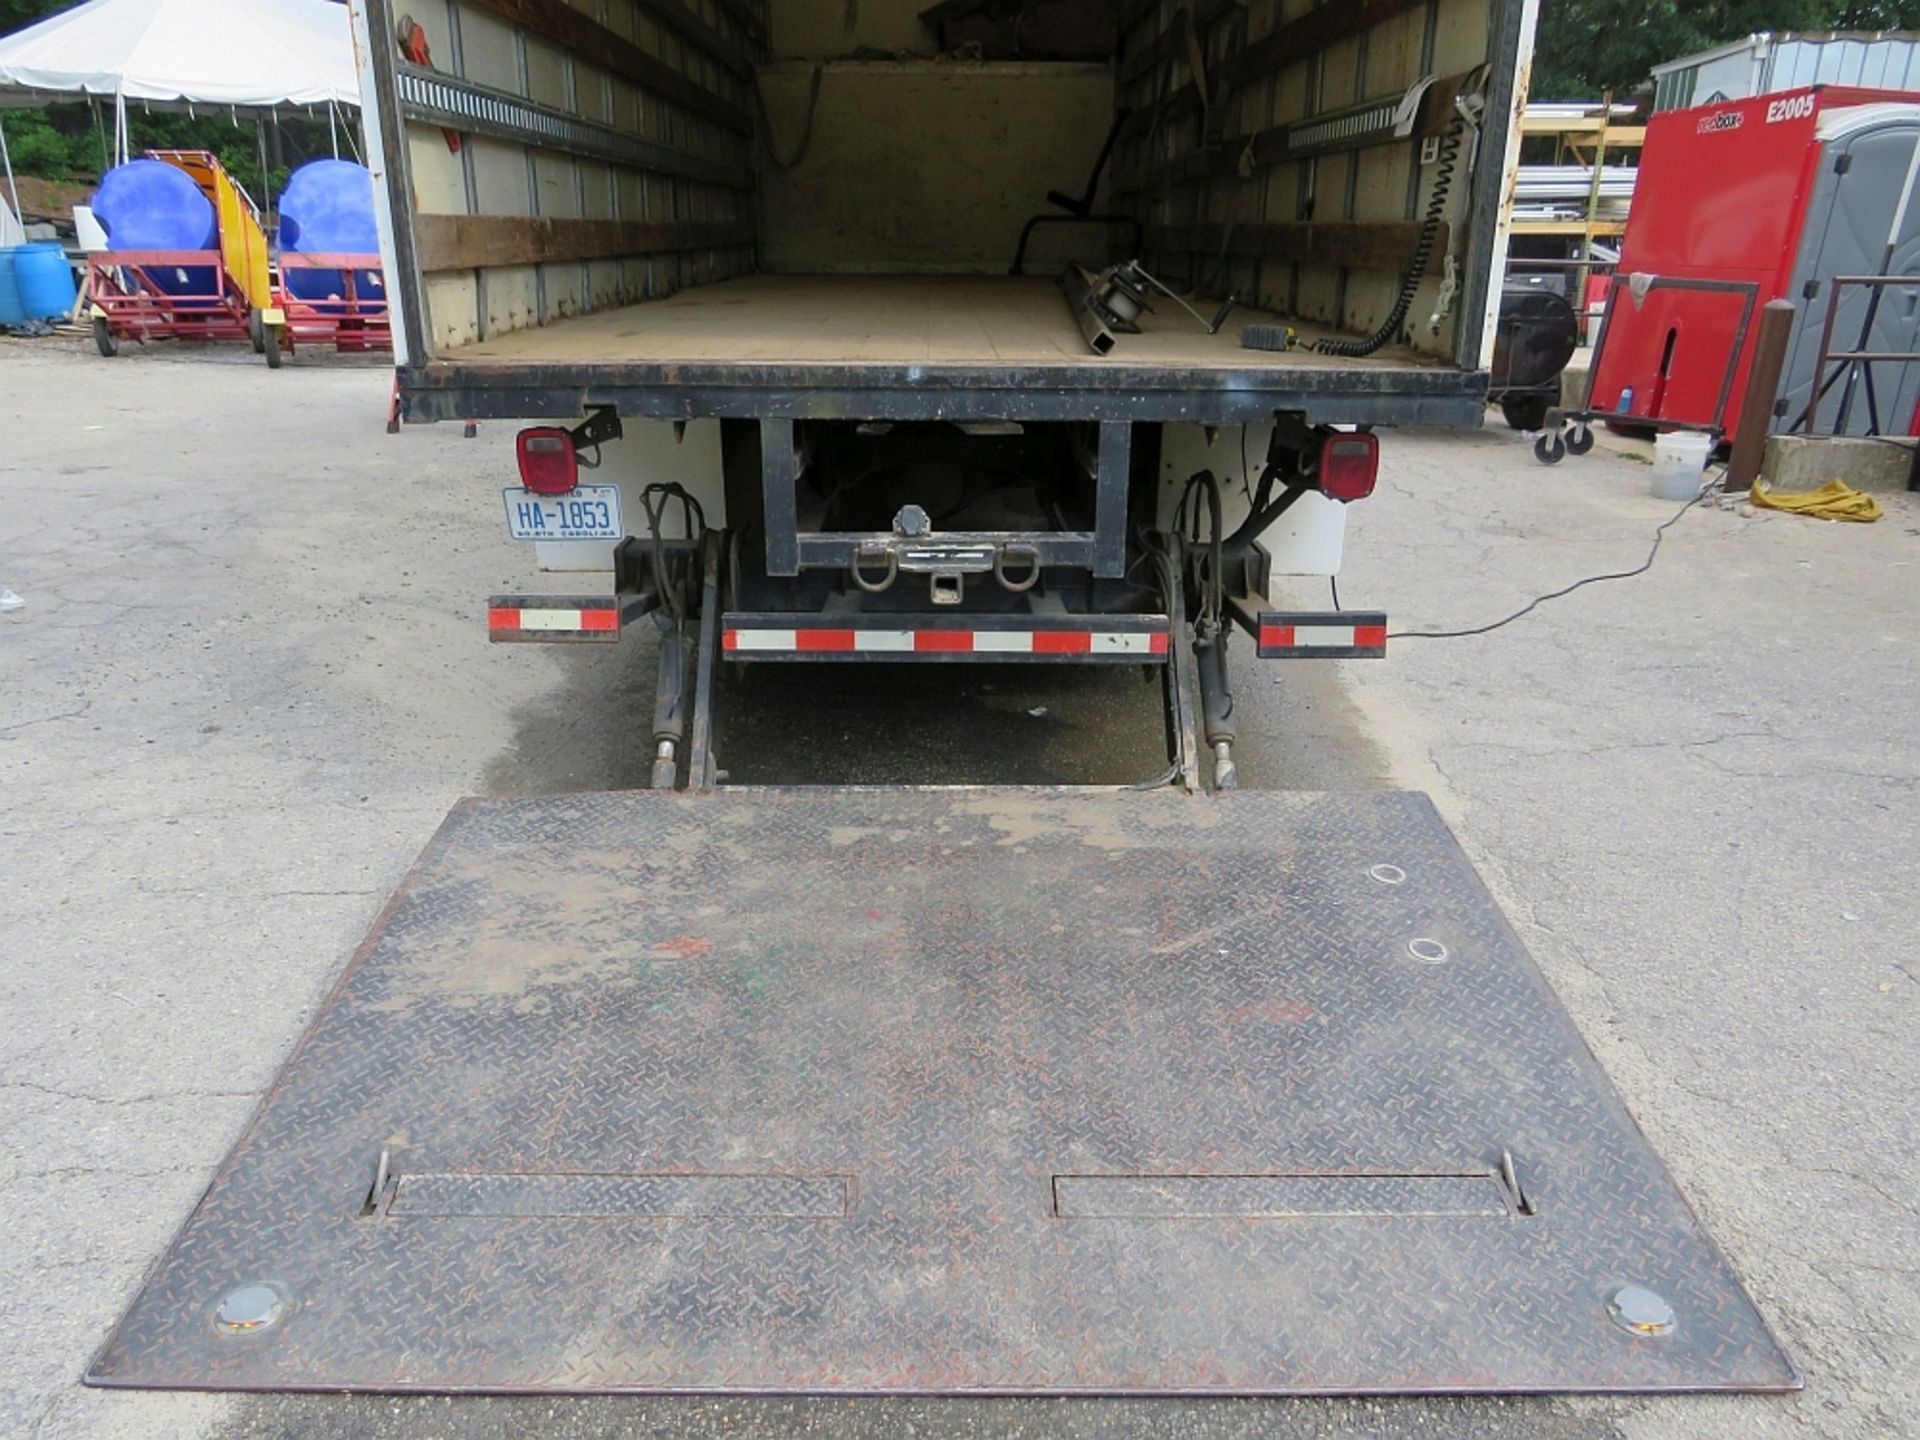 2002 Ford F650 Diesel Delivery Truck, 26,000 lb. GVWR, 22ft Box - Image 6 of 11